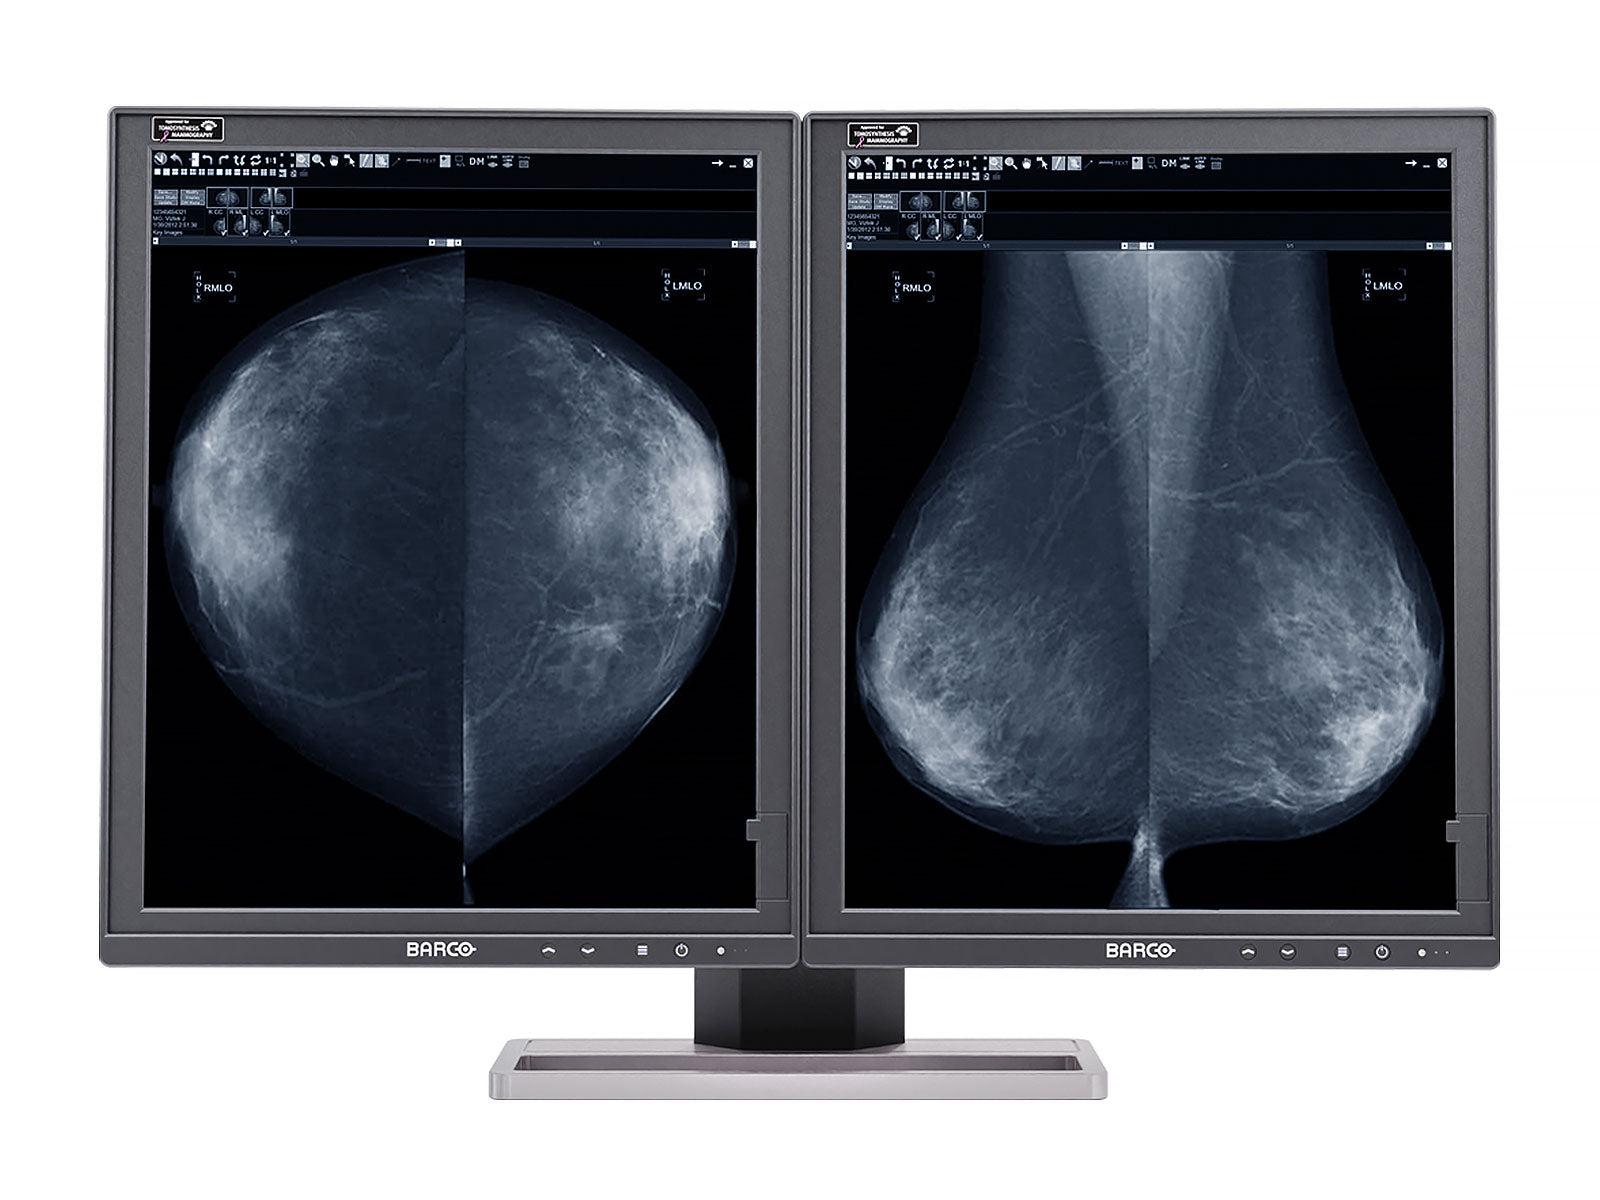 Barco Coronis MDMG-5221 5MP 21" Grayscale Tomosynthesis LED 3D-DBT Mammography Display (K9300520C)